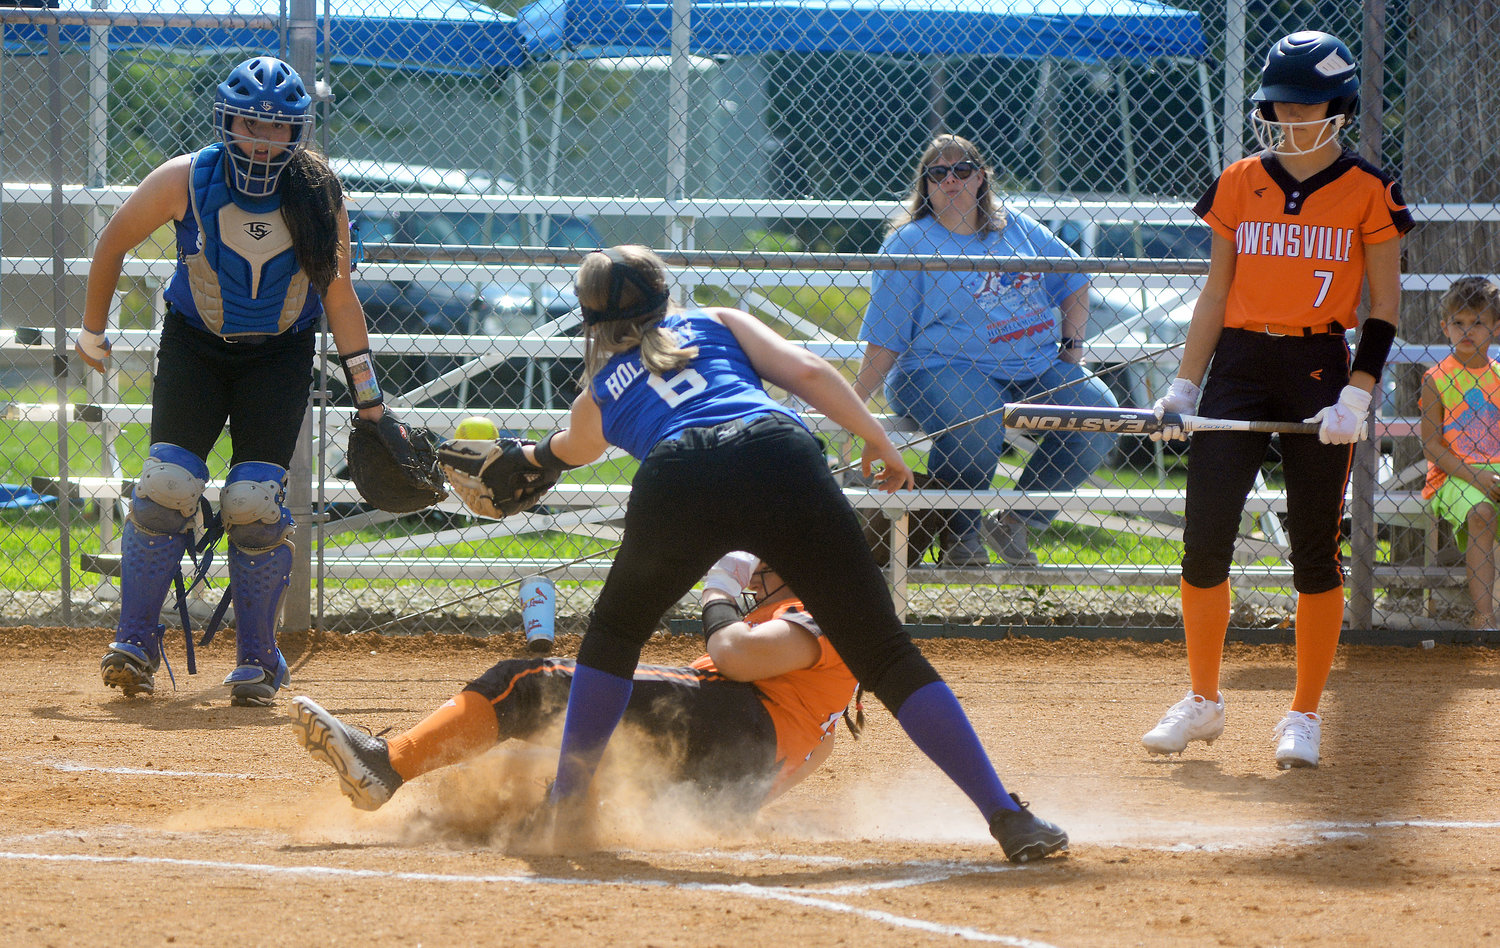 Kate Blankenship (center) slides safely into home plate under the tag of Holliday during Owensville’s 8-4 victory over their Gasconade County rivals in two innings due to the jamboree time limit rule. Owensville will open their season this weekend at Sullivan’s Campbell-Chapman Sports Complex as part of the Peoples Bank Back to School Softball Classic hosted by Sullivan High School.